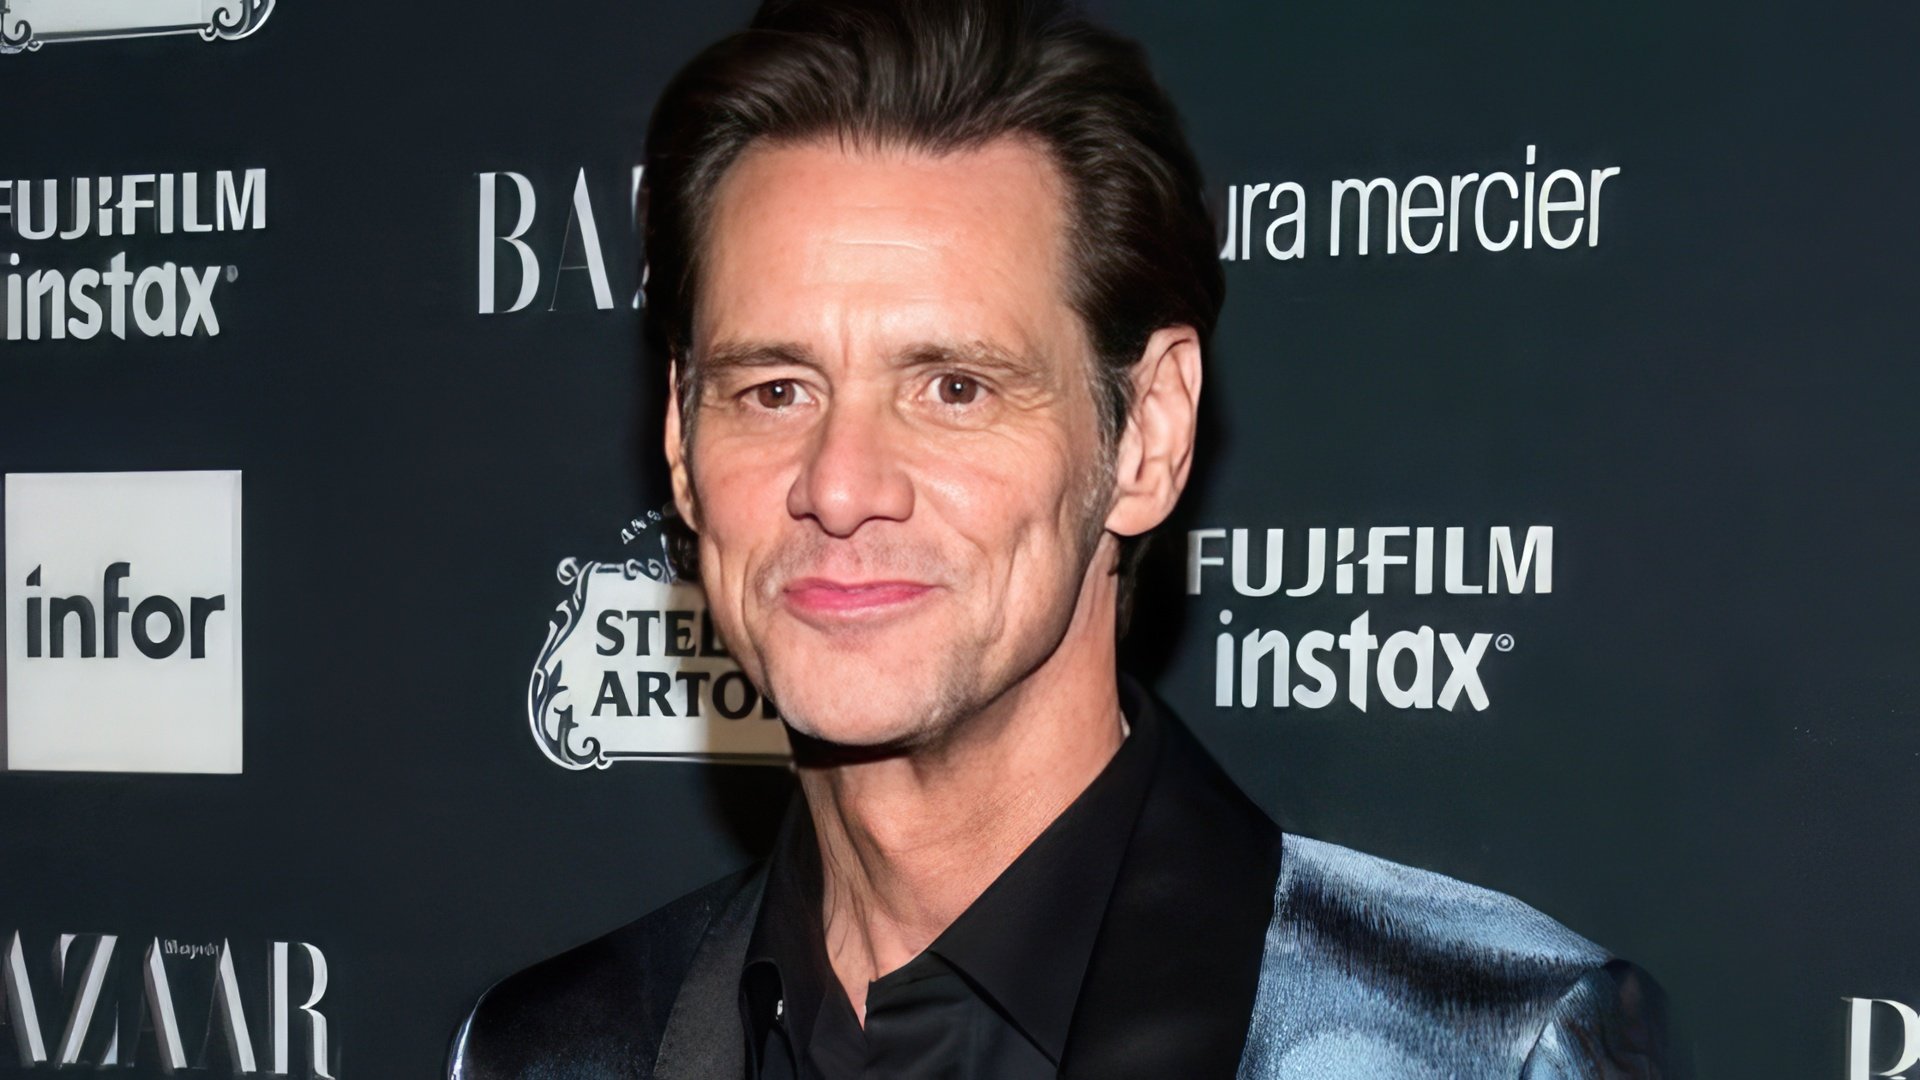 Jim Carrey first appeared in people after his former girlfriend’s death